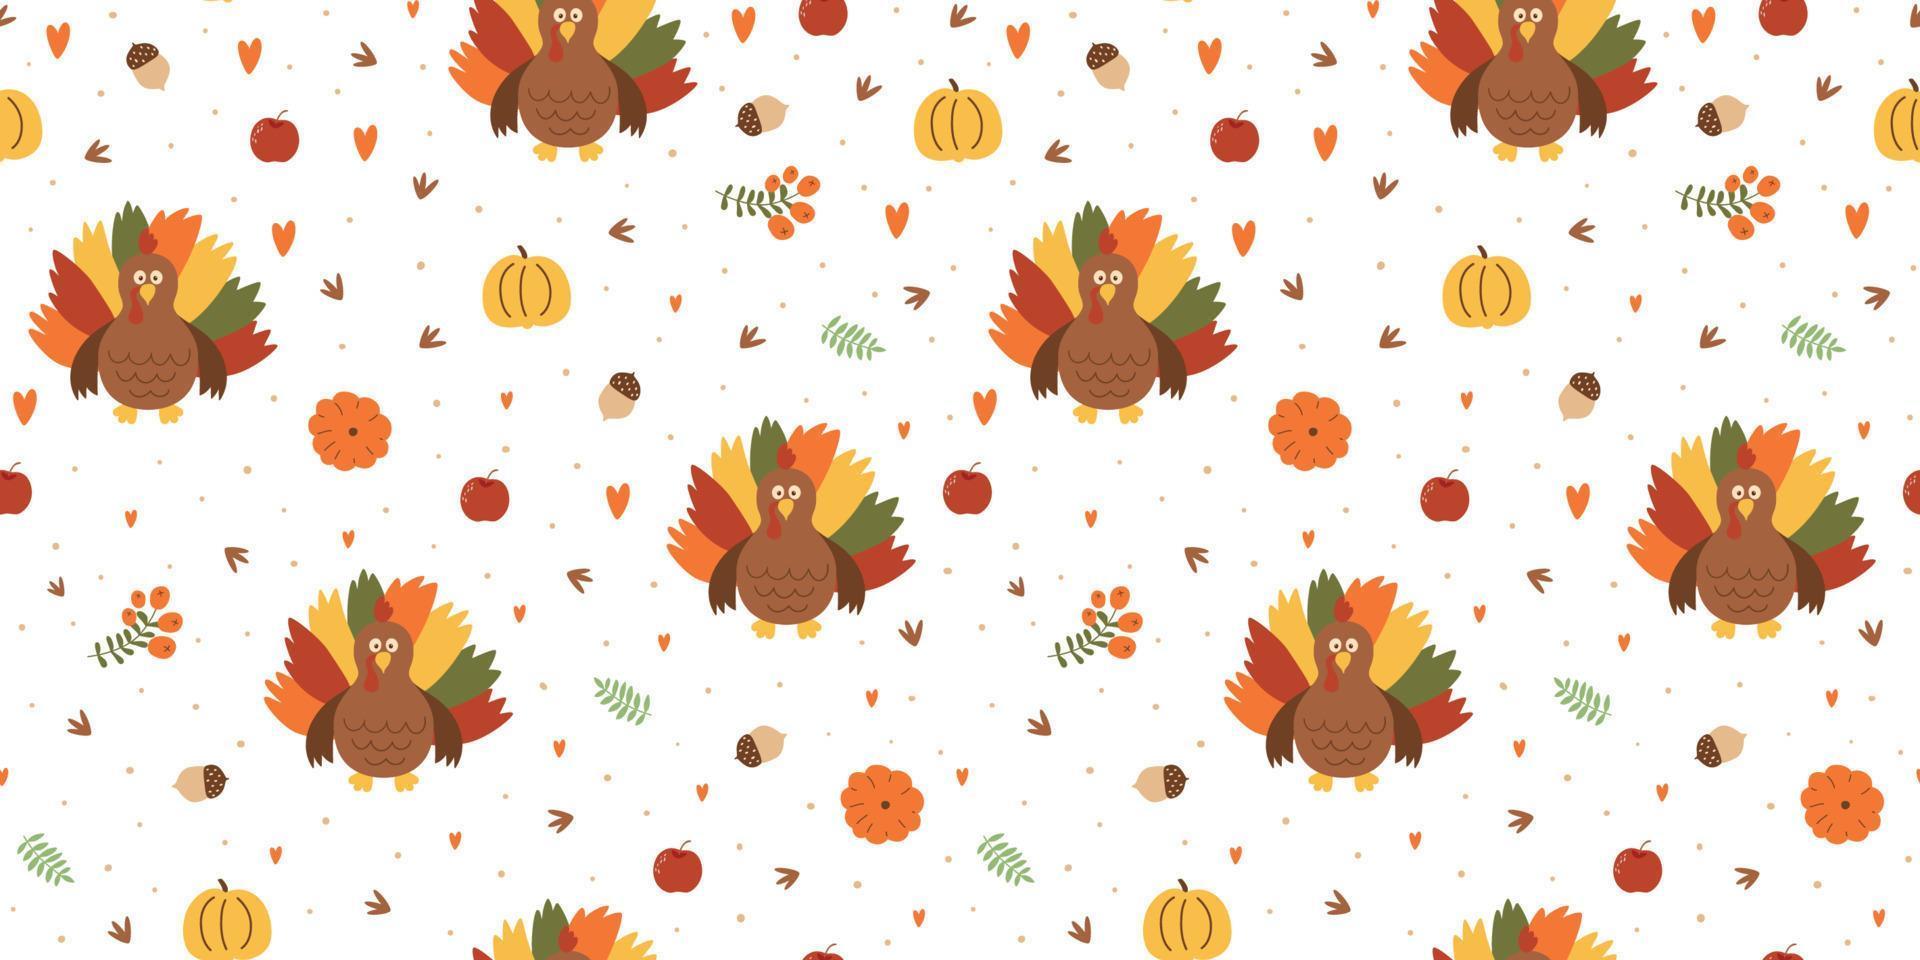 Thanksgiving day vector pattern with turkey, pumpkins illustration, fall leaves hand drawn in cute cartoon style. Autumn Thanksgiving seamless pattern, repeating background for dinner party